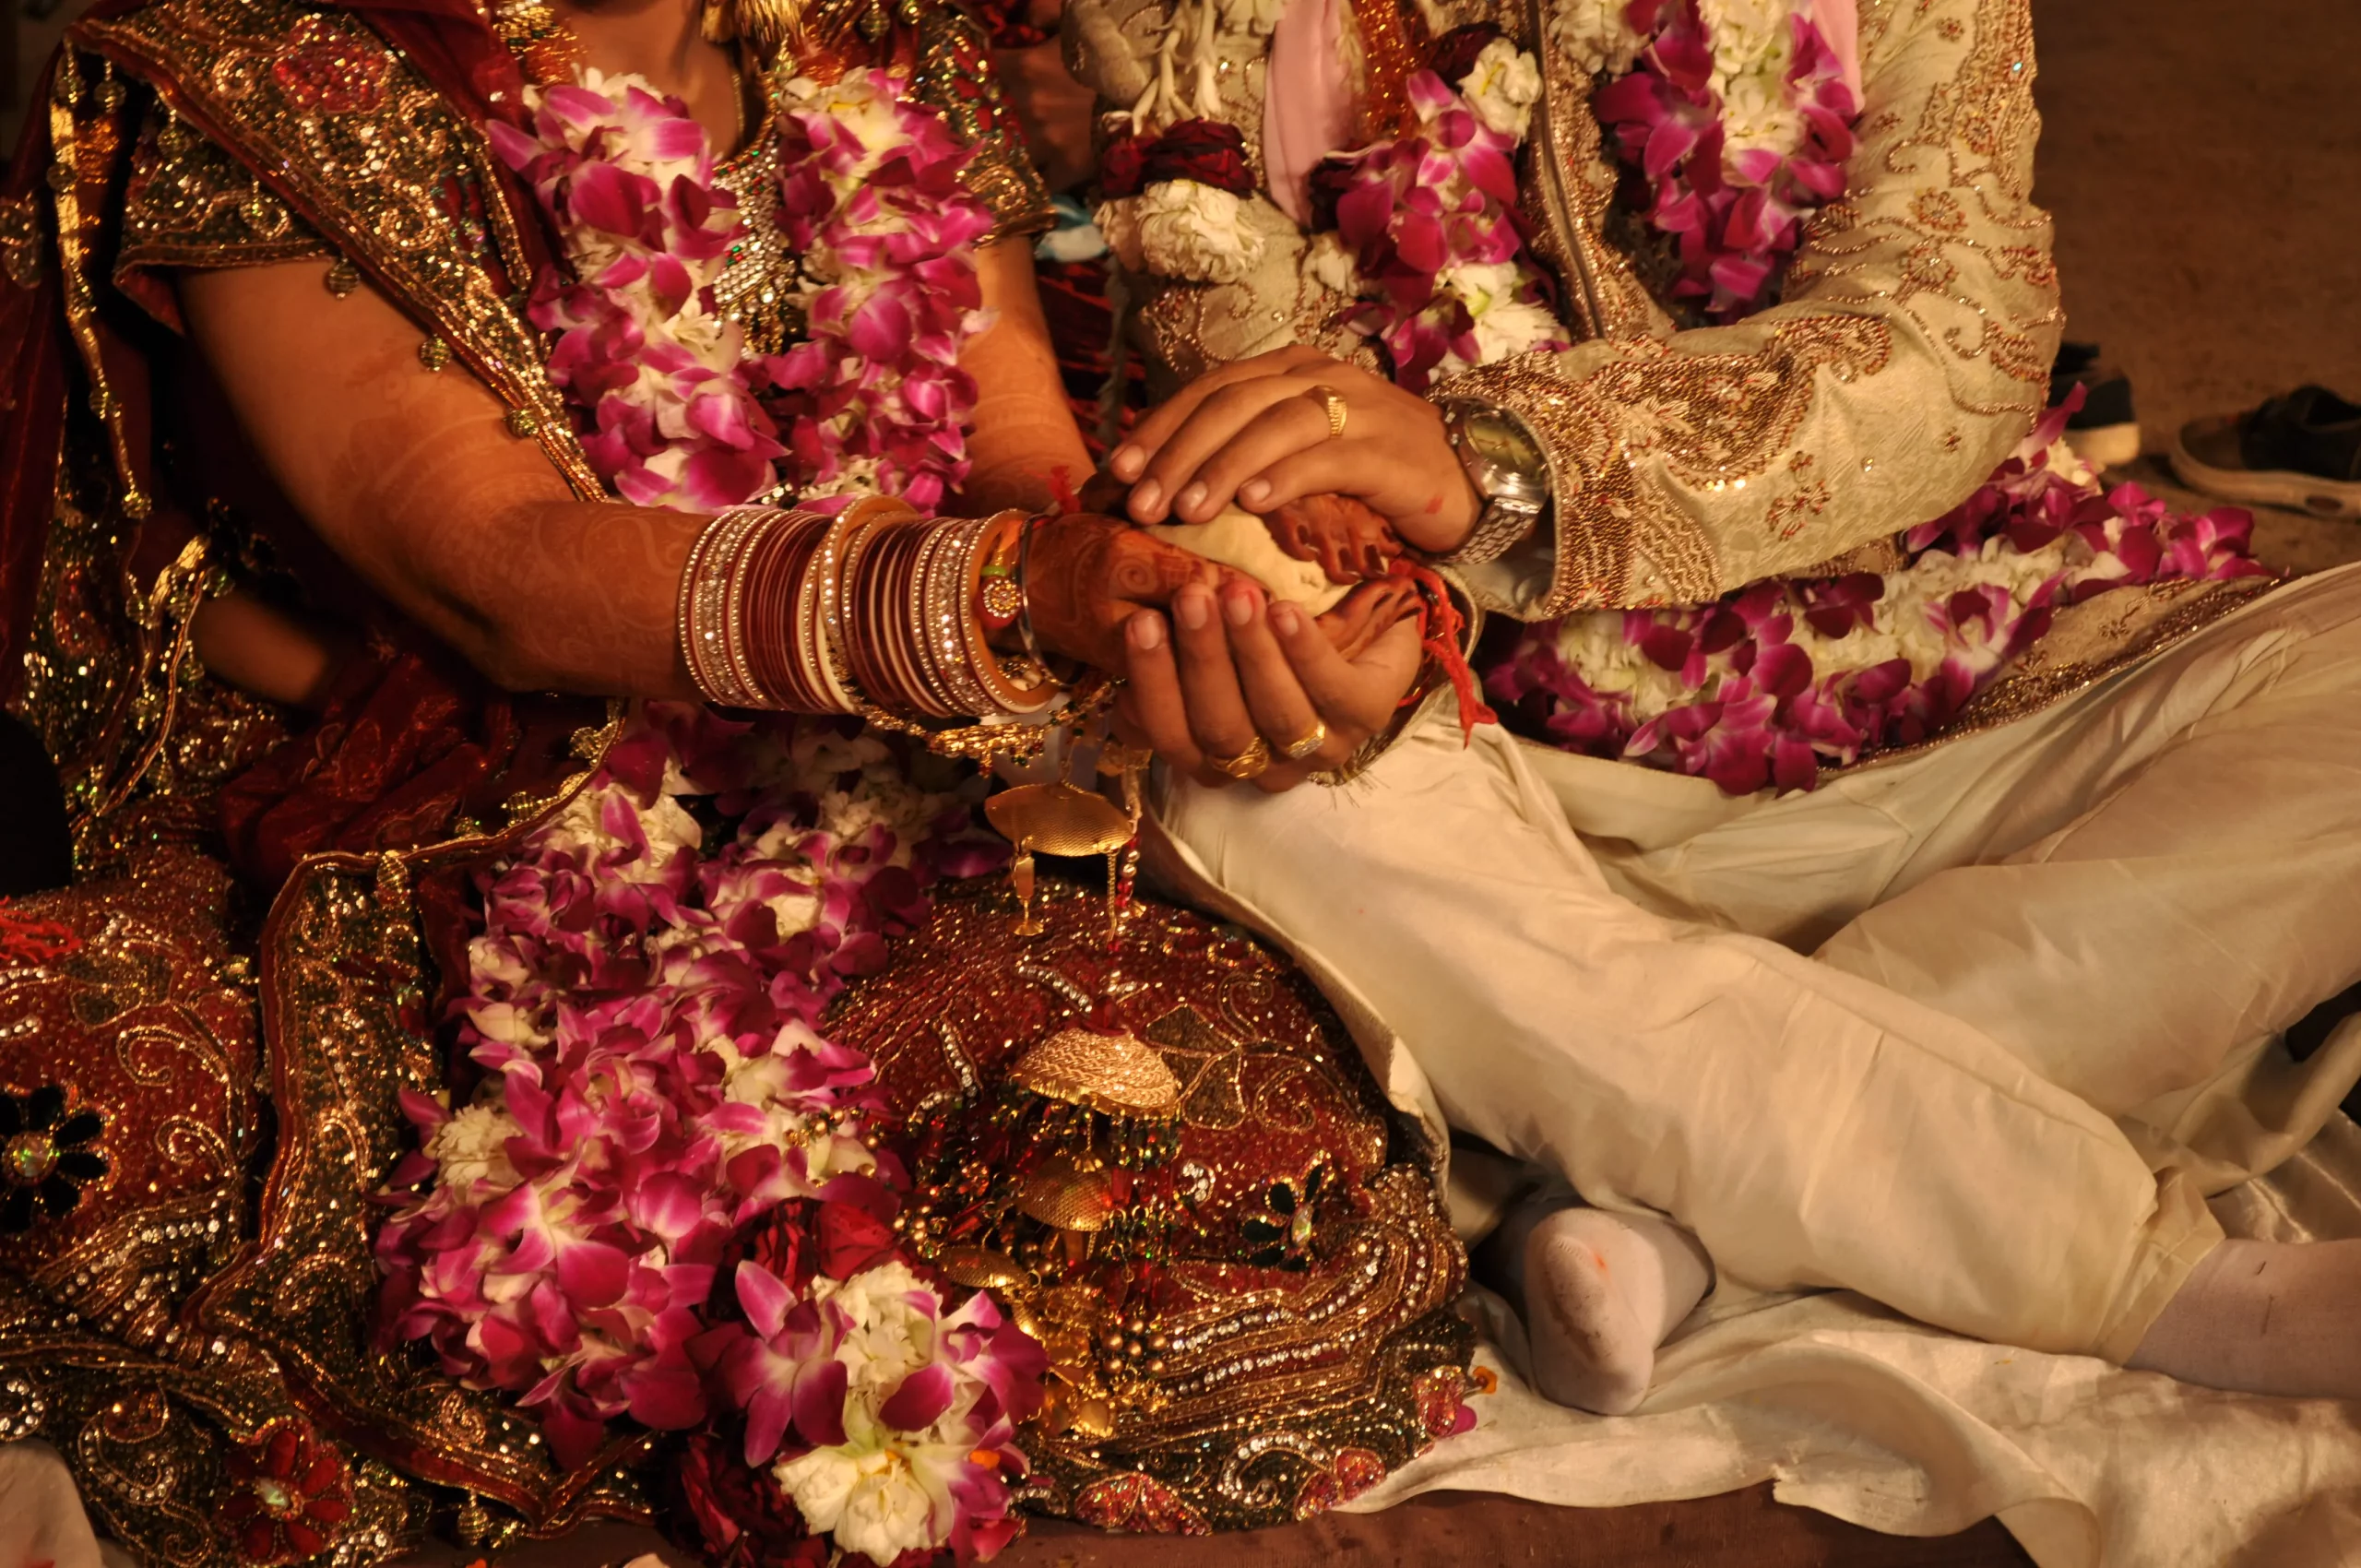 In bizarre case, 8 years after marriage Vadodra woman finds husband was earlier a woman